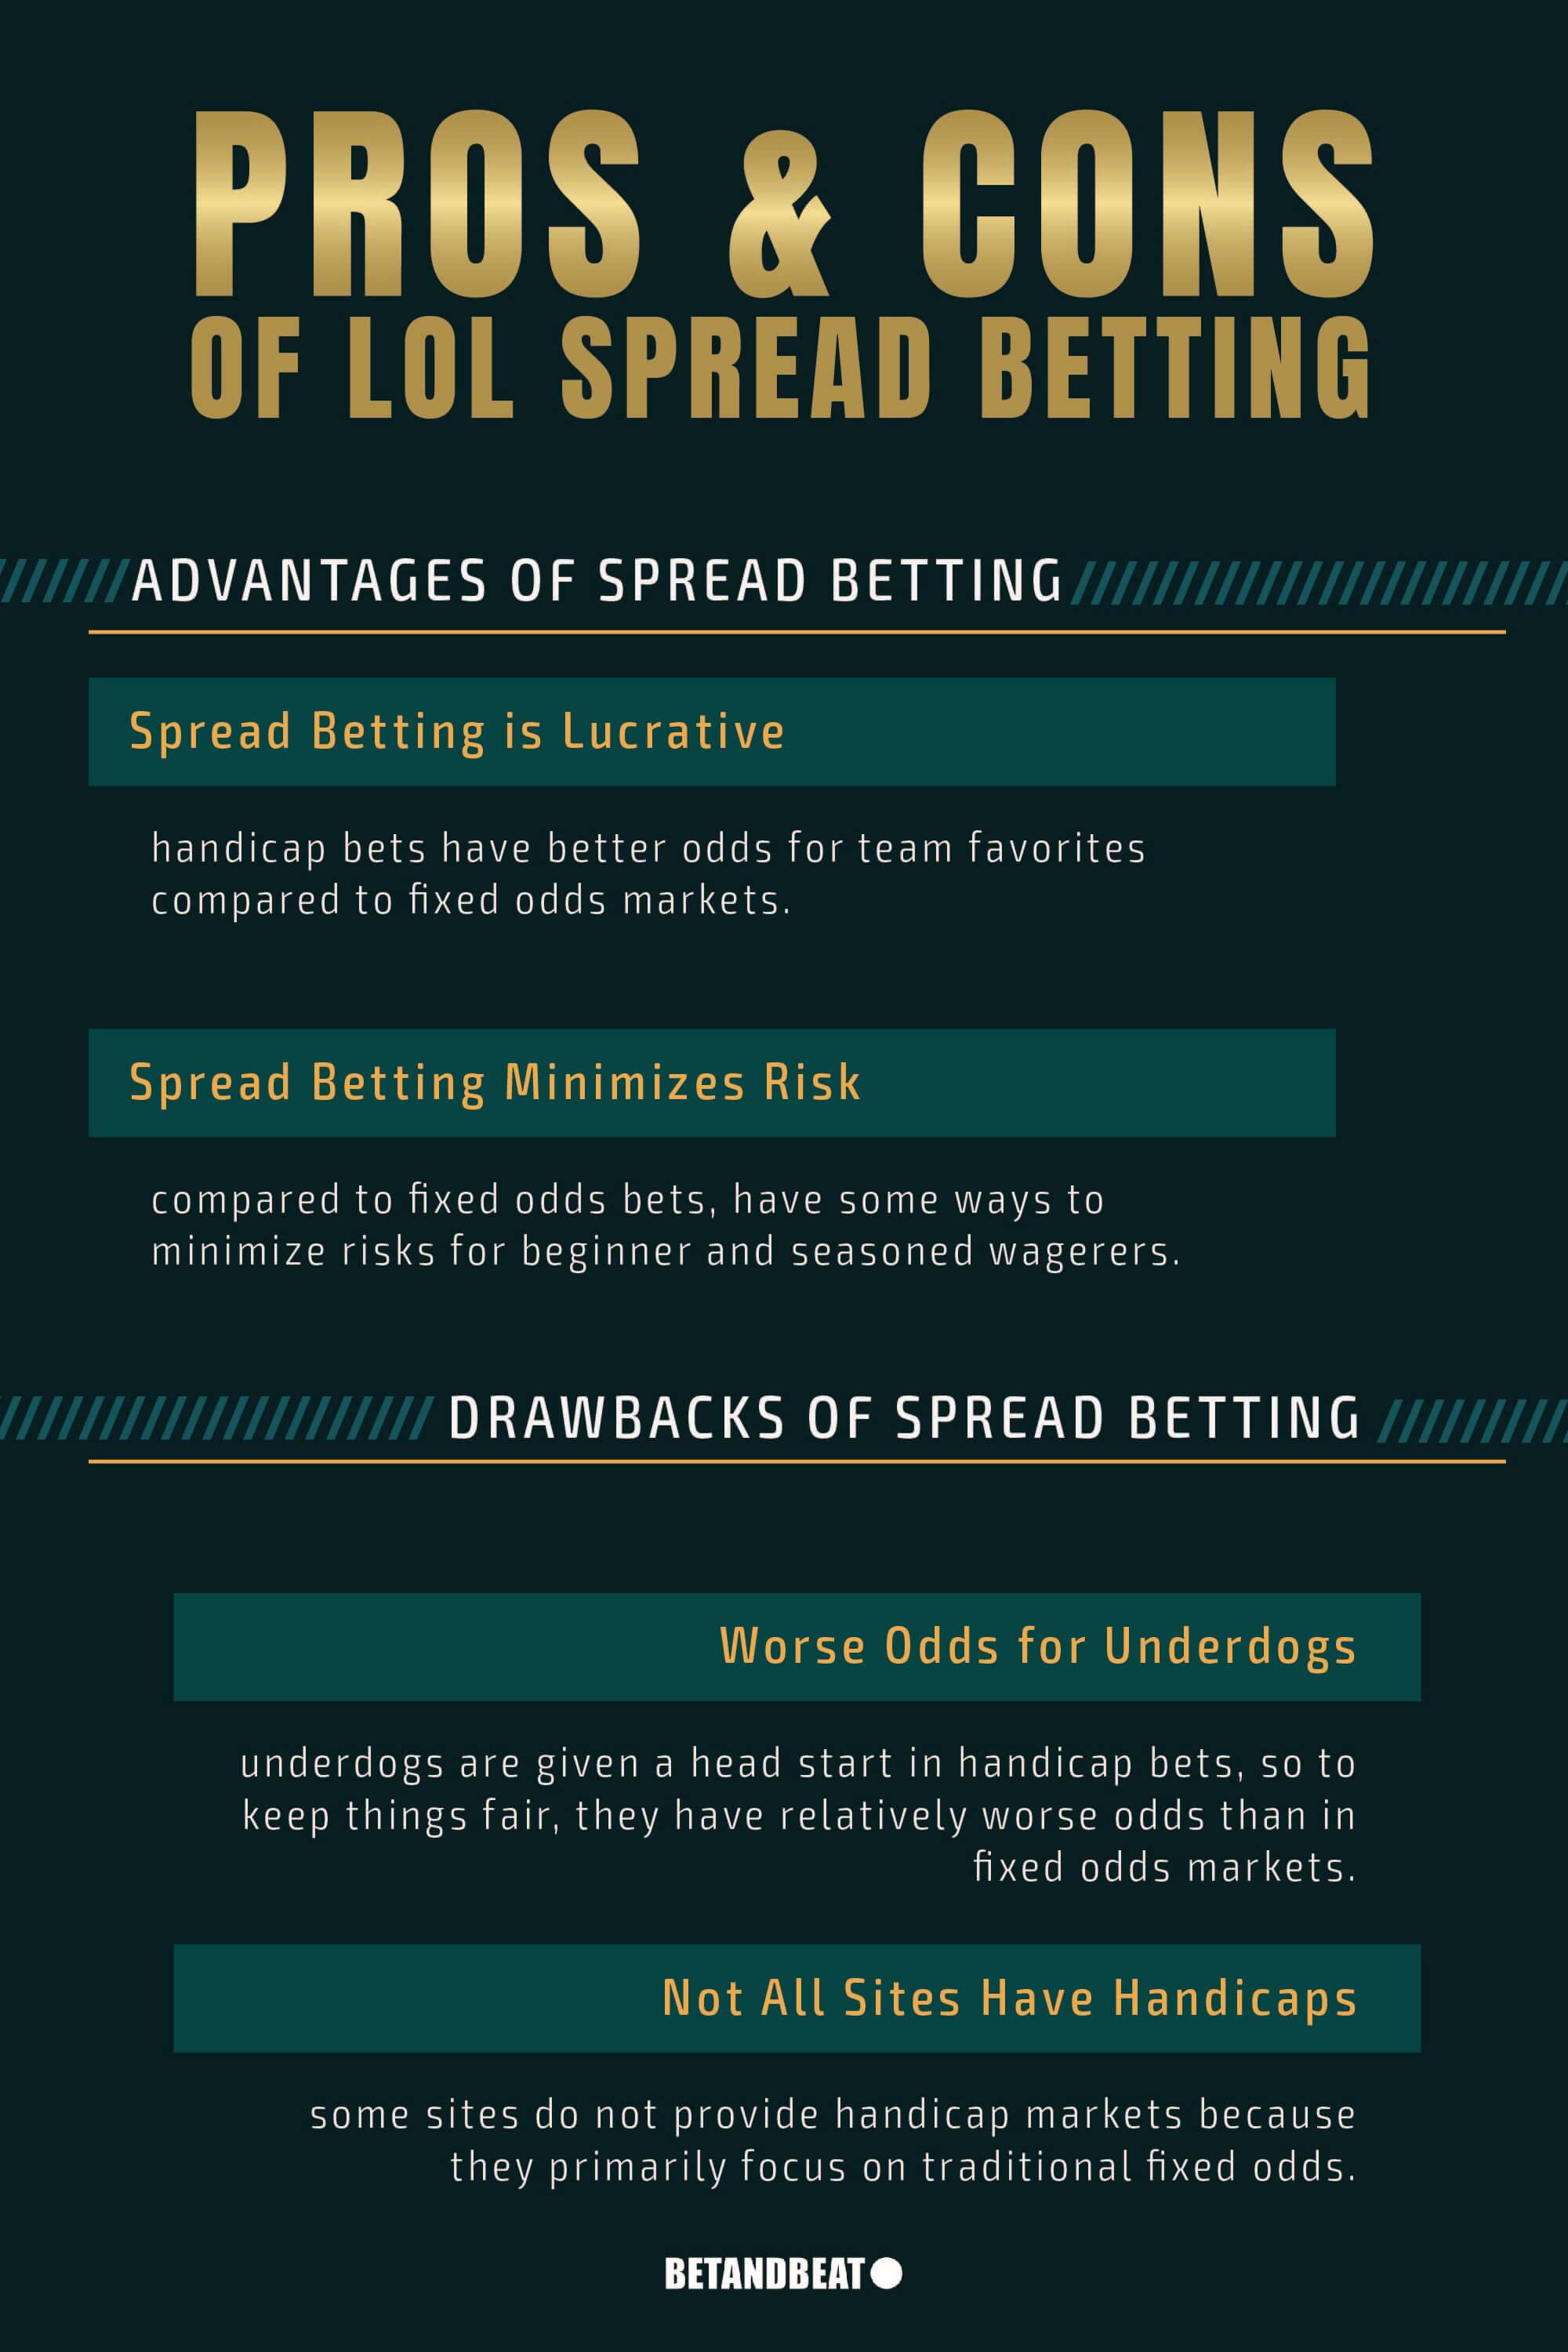 Photo: spread meaning in betting